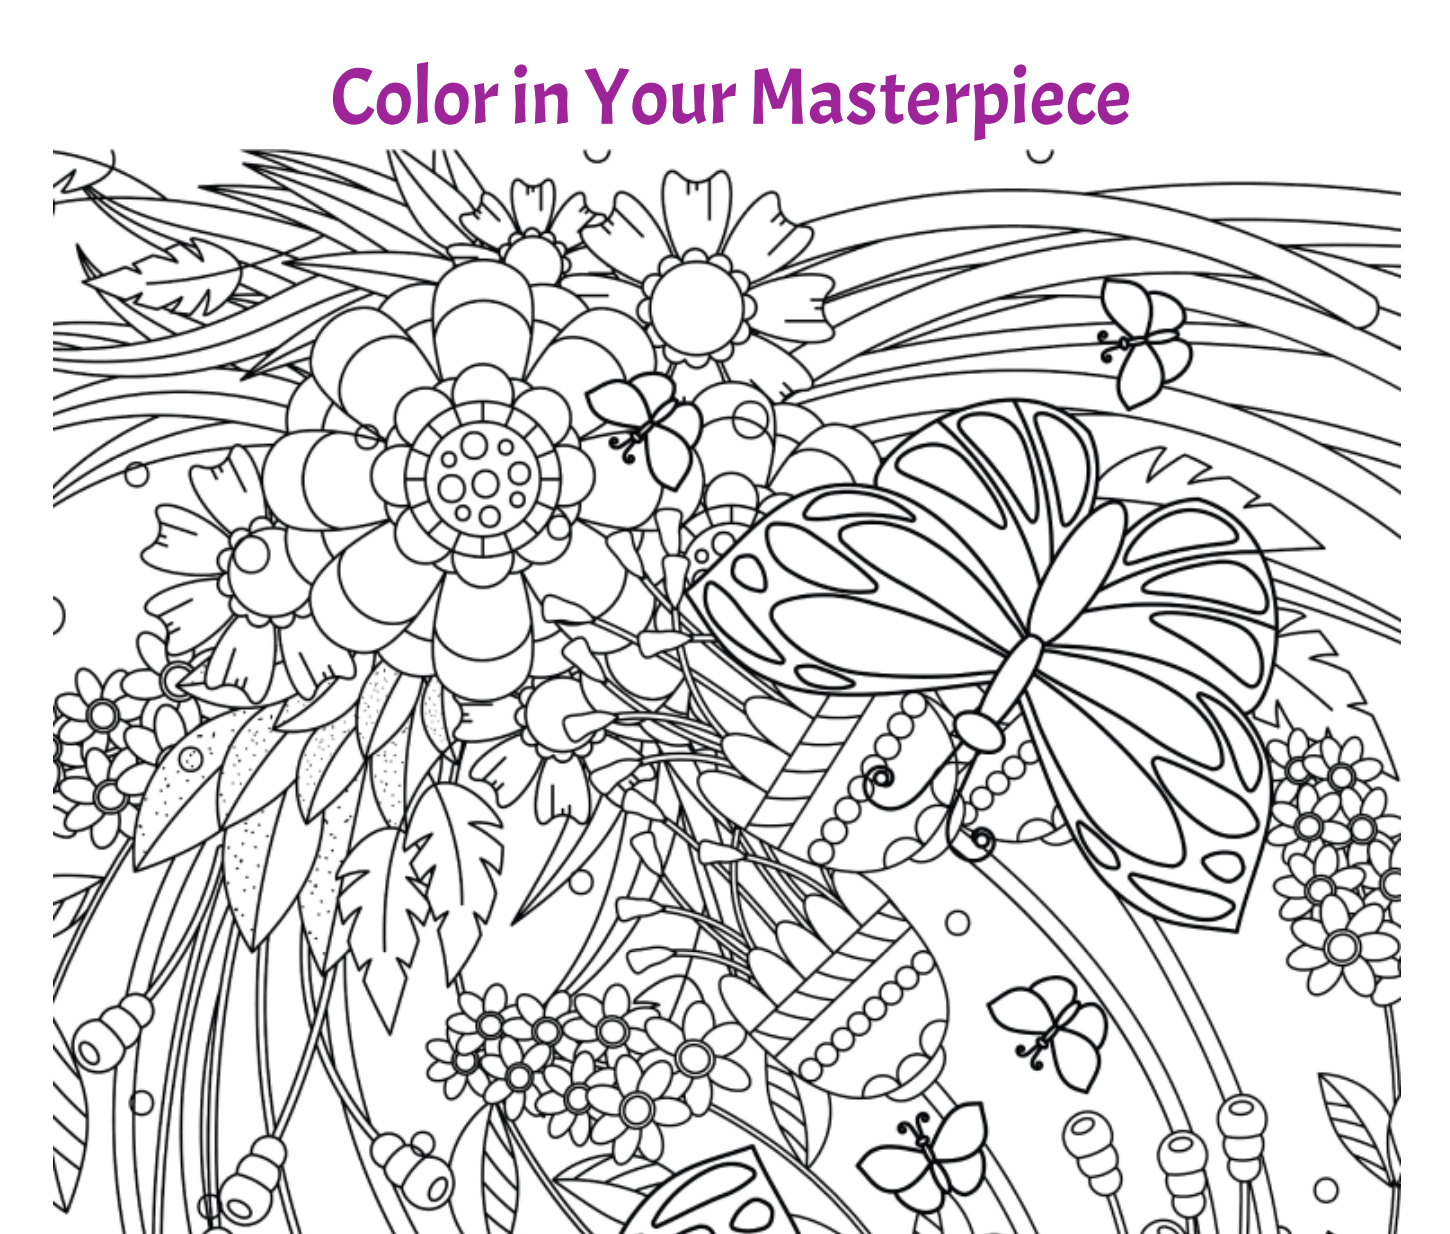 Spring Coloring Book For Adults: An Easy and Simple Coloring Book for Adults  of Spring with Flowers, Butterflies and More Fun, Easy, and Relaxing Desi  (Paperback)